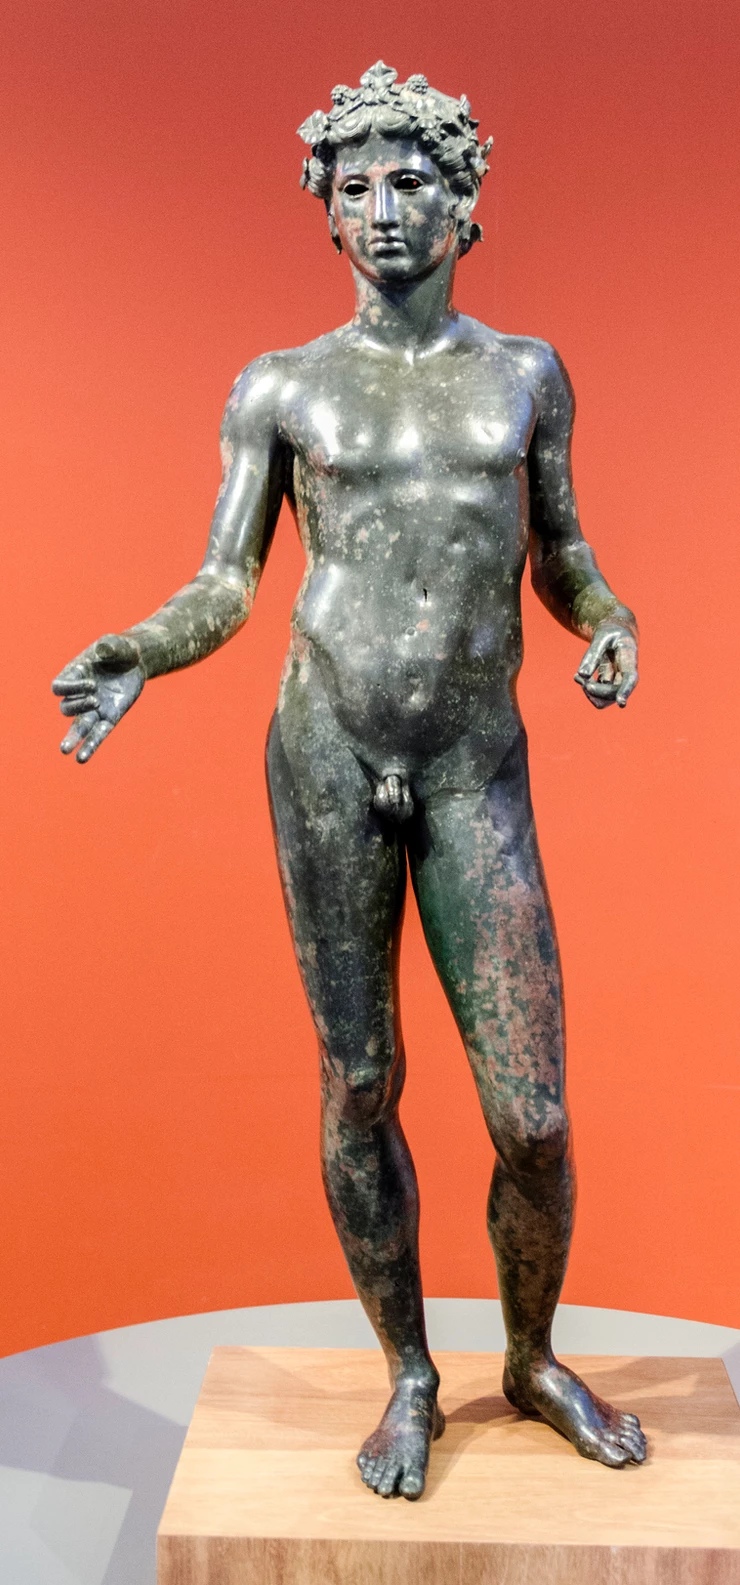 Ephebe of Antequera, a bronze statue from the 1st century A.D. in the Antequera Municipal Museum